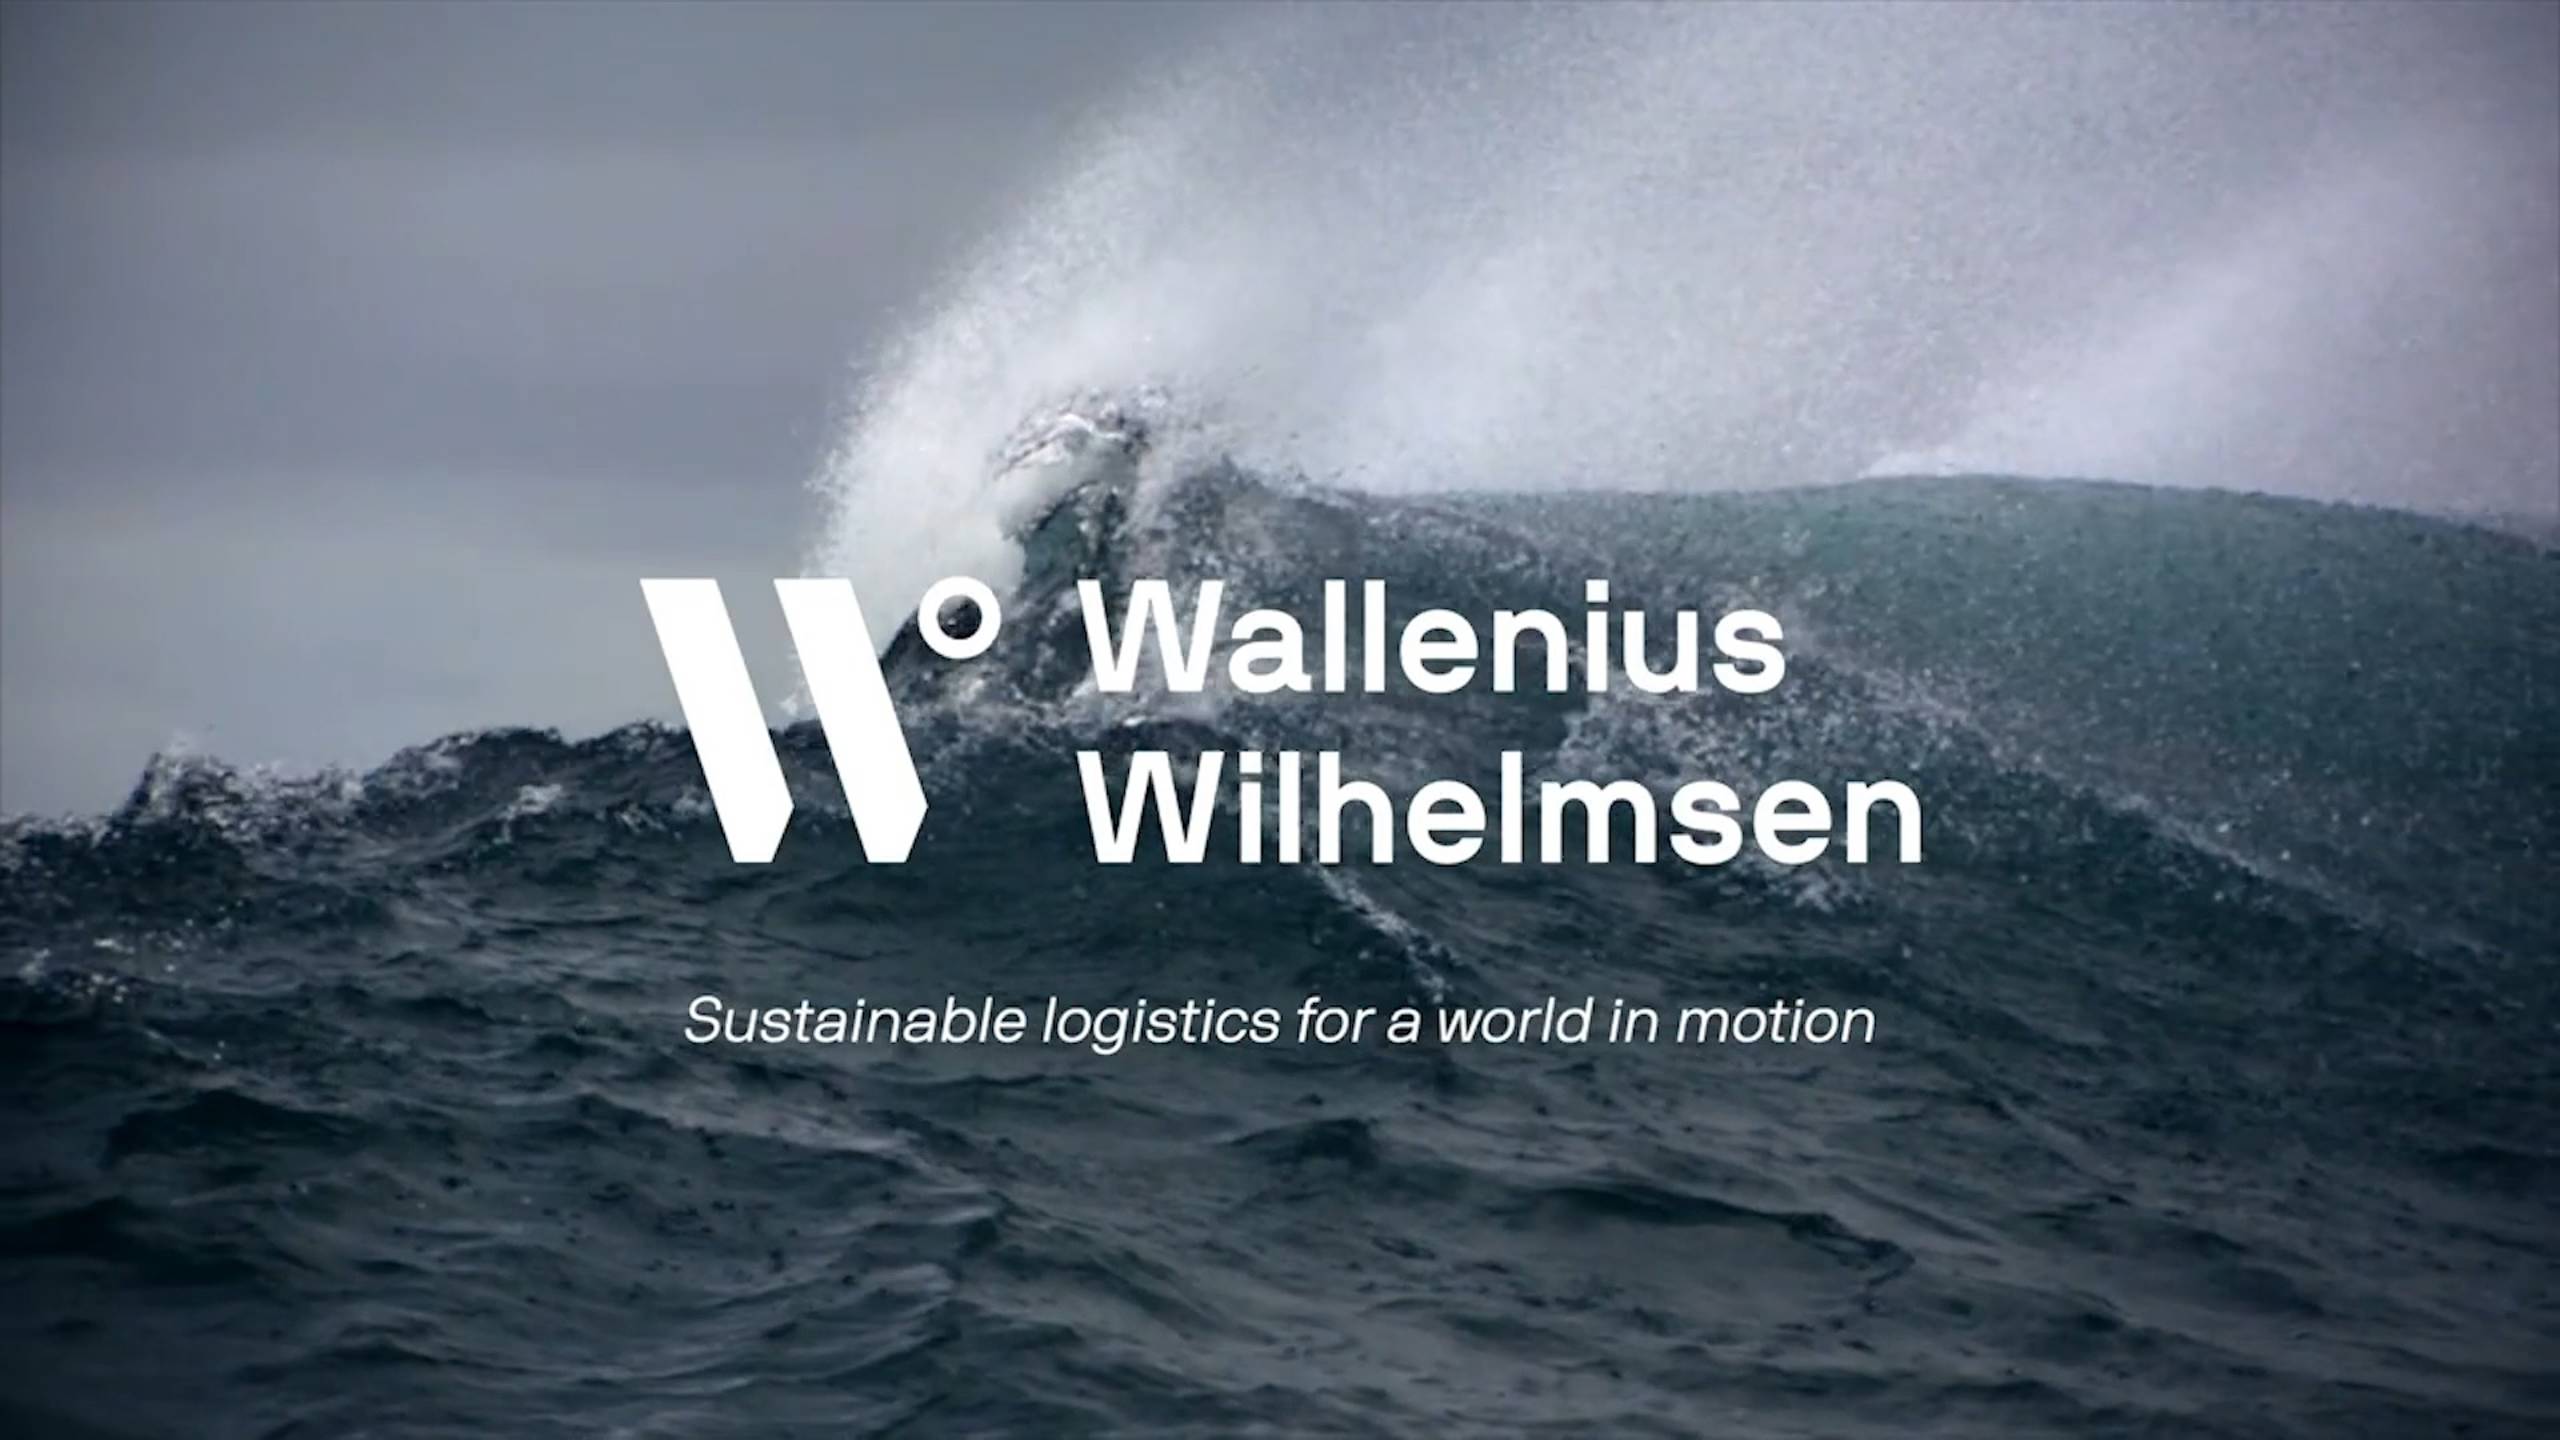 Ocean waves with the text: Wallenius Wilhelmsen, sustainable logistics for a world in motion